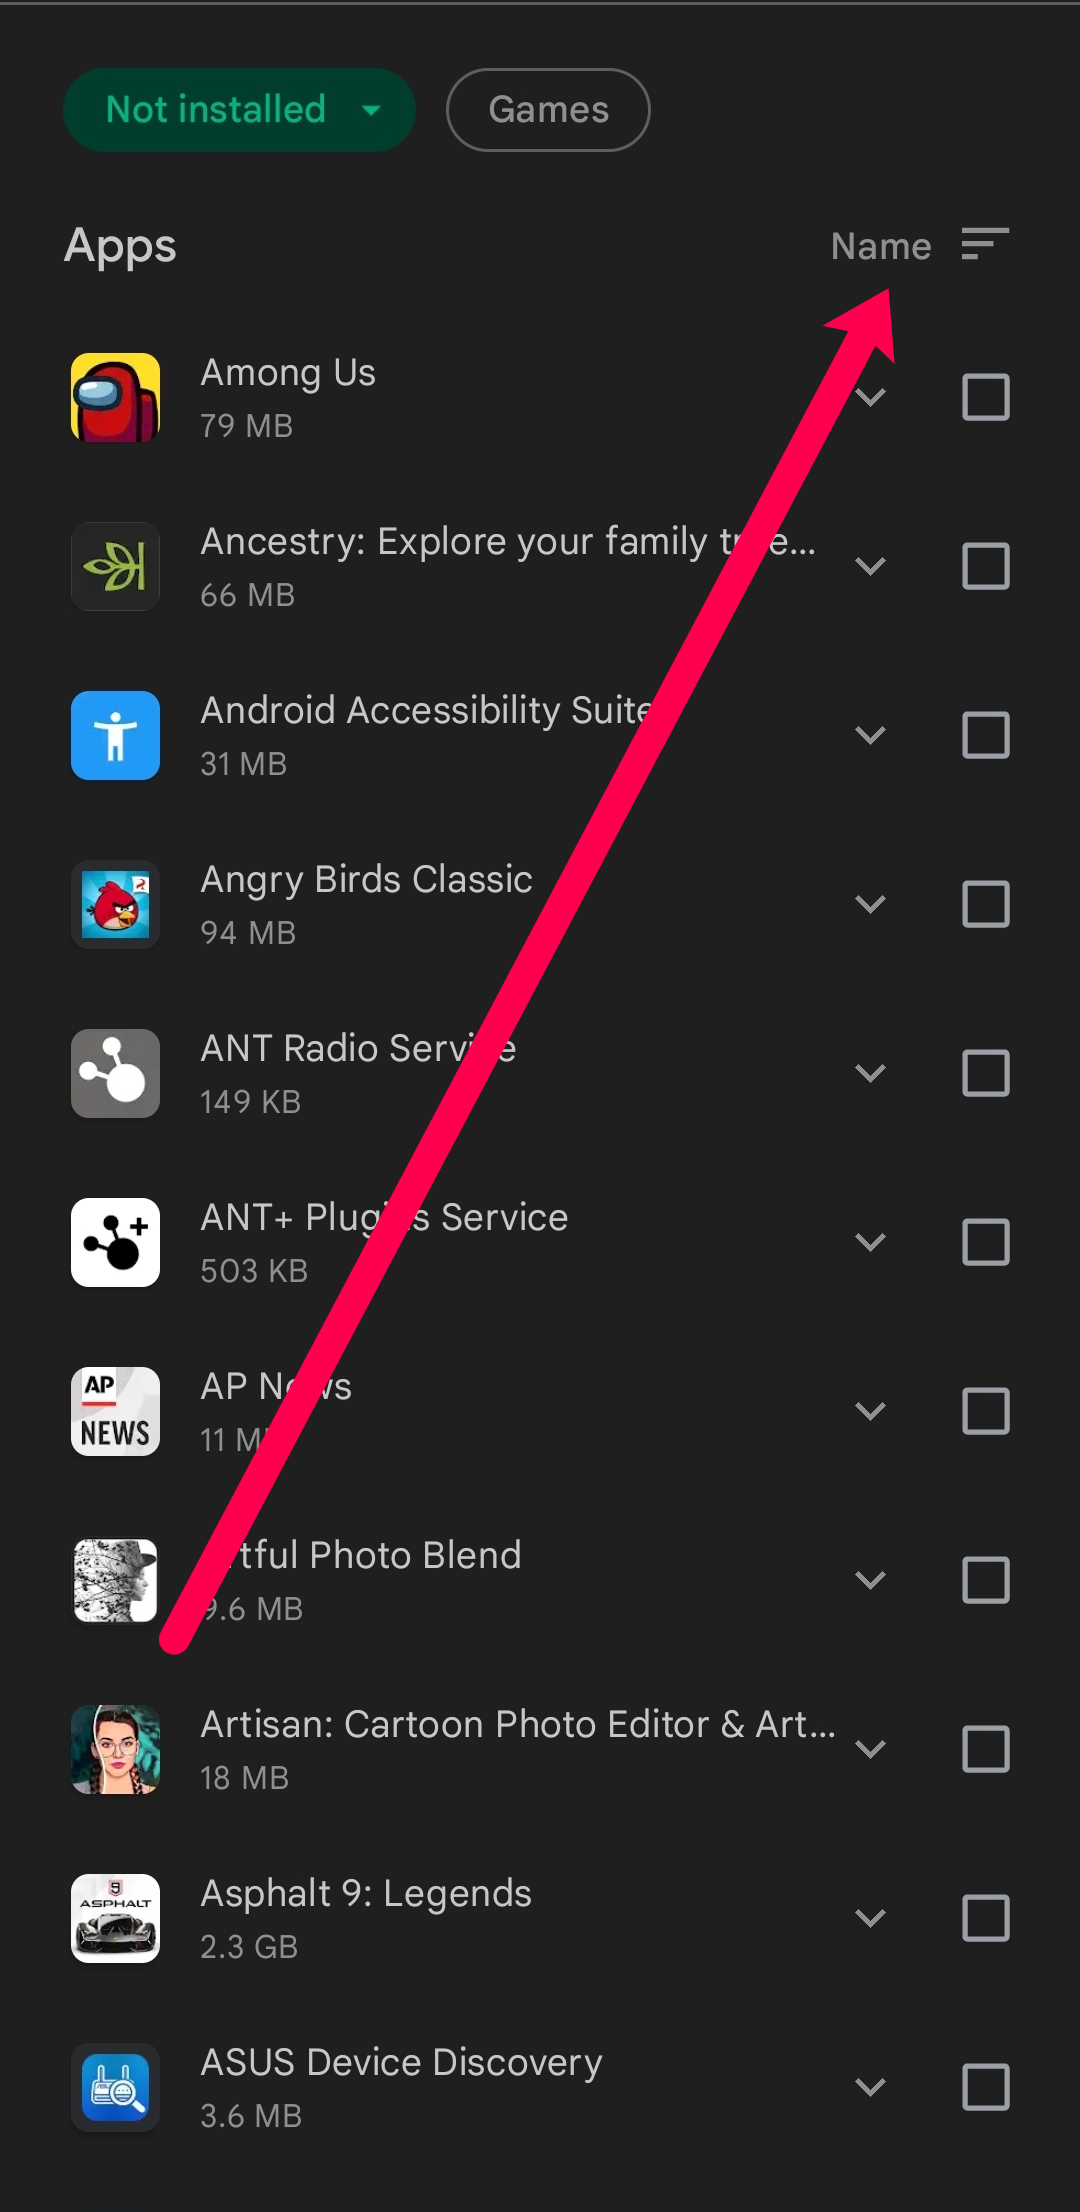 Can removed apps be restored?